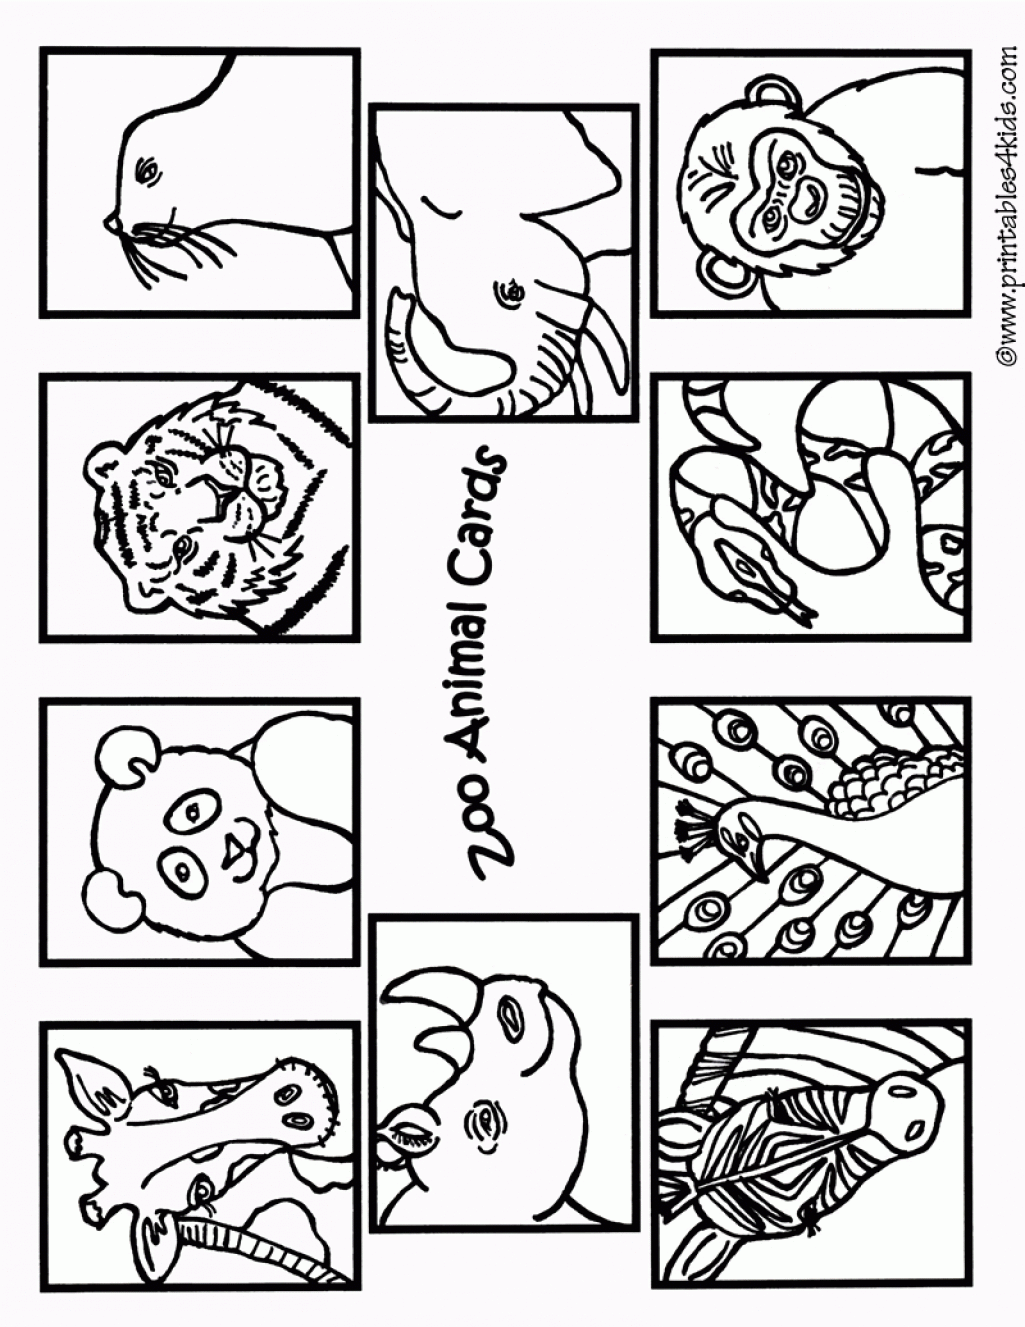 free-zoo-animal-coloring-pages-printable-download-free-zoo-animal